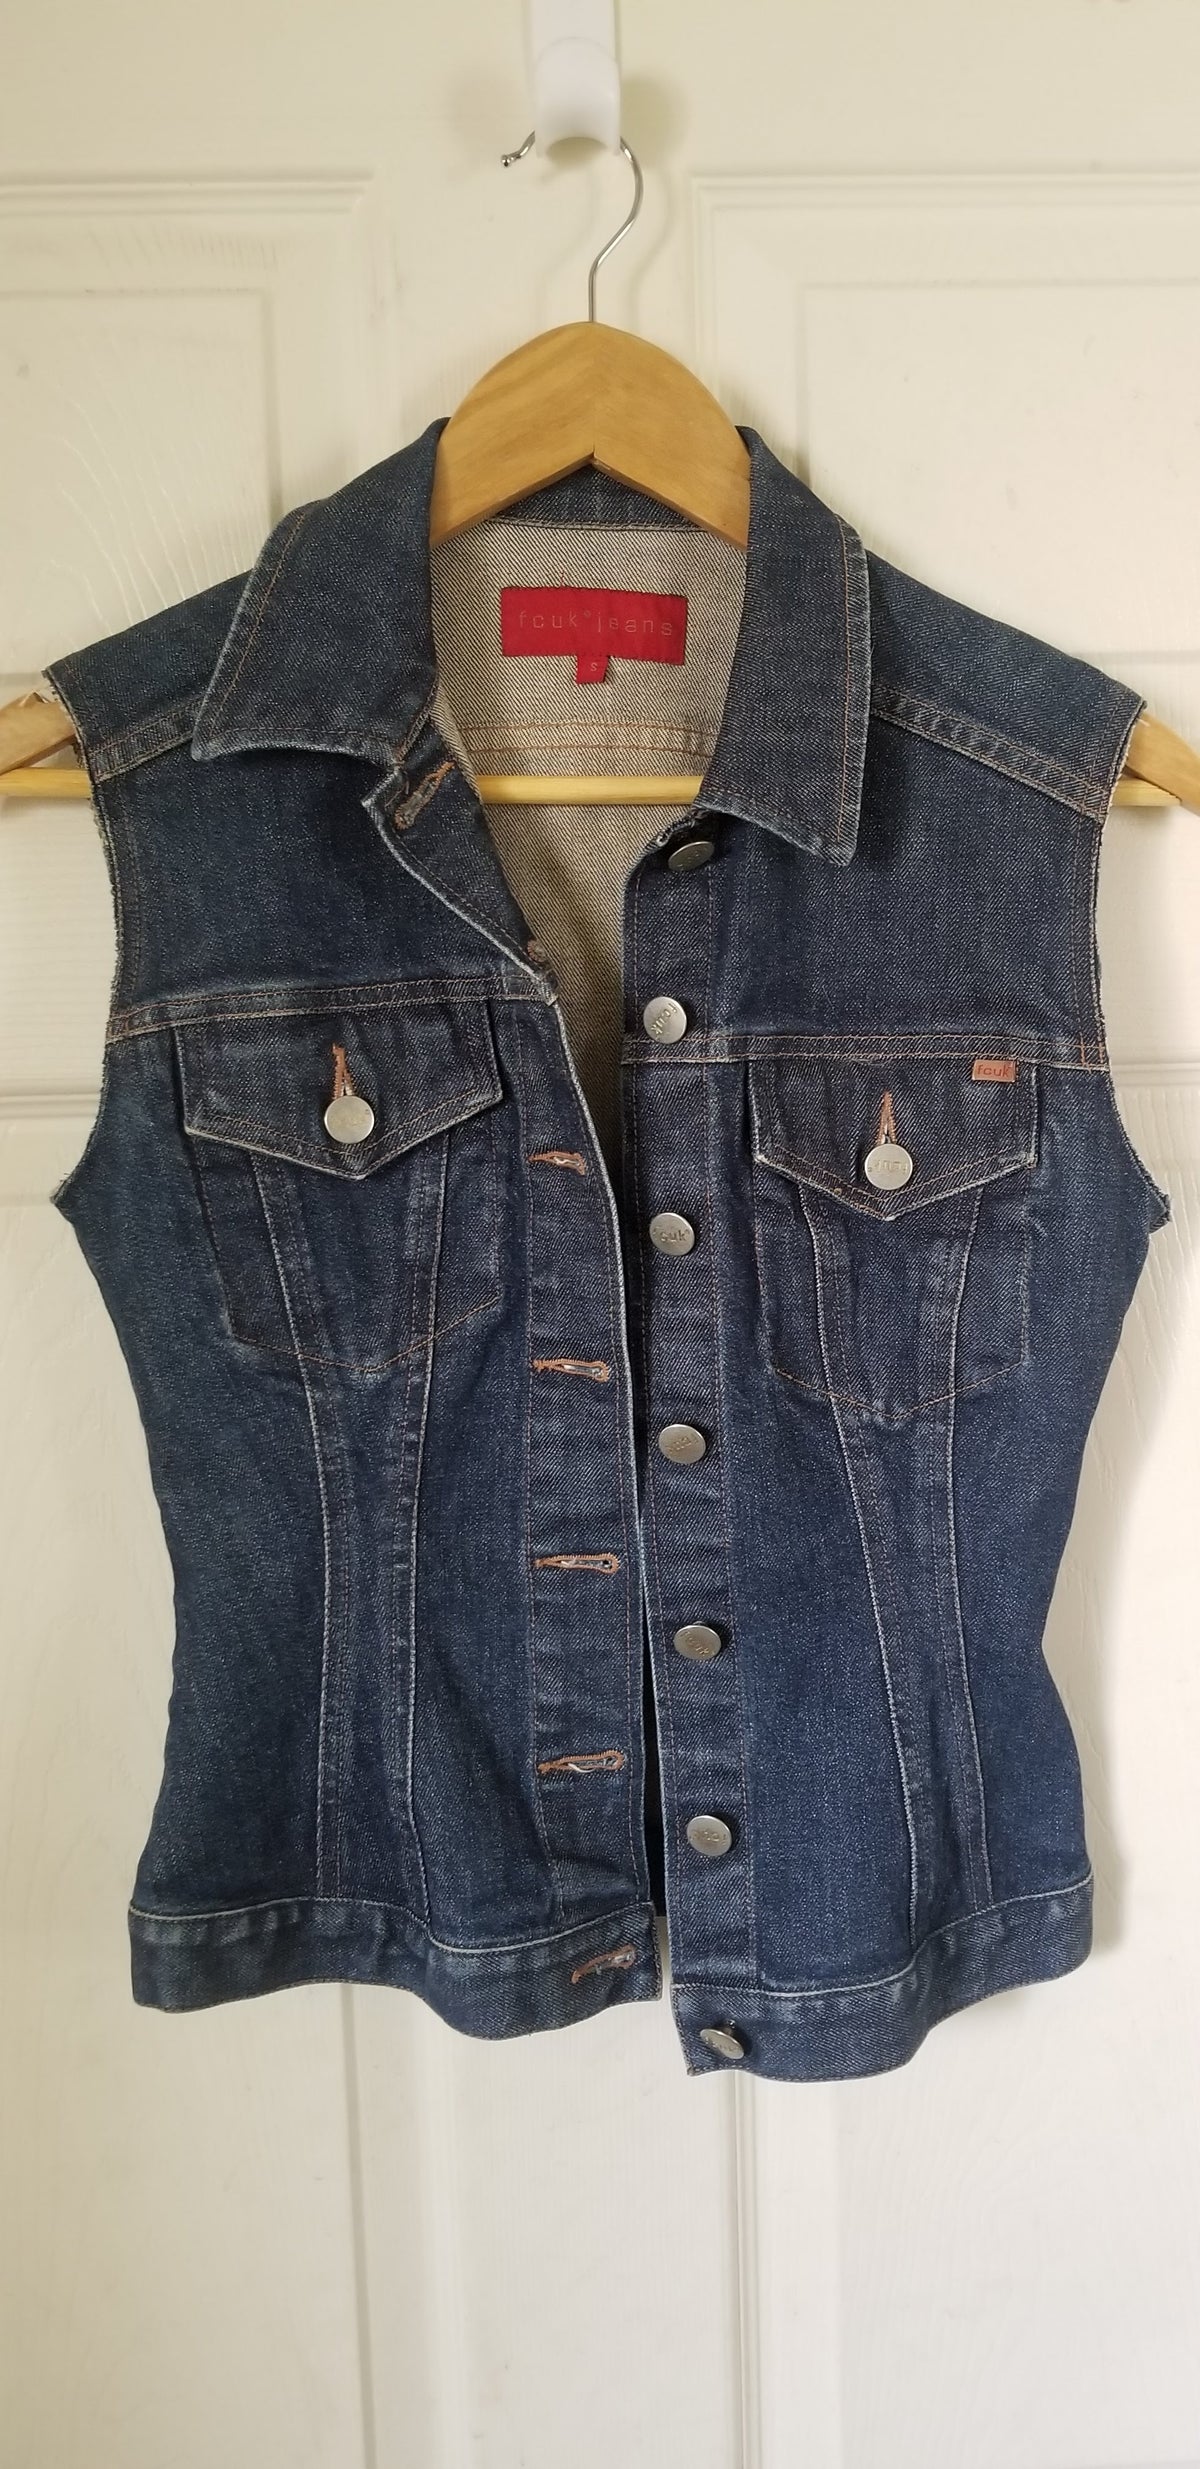 SOLD - Upcycled Jean Jacket Vest Vegan Club featuring a chicken hand-painted by artist Brandi Jae